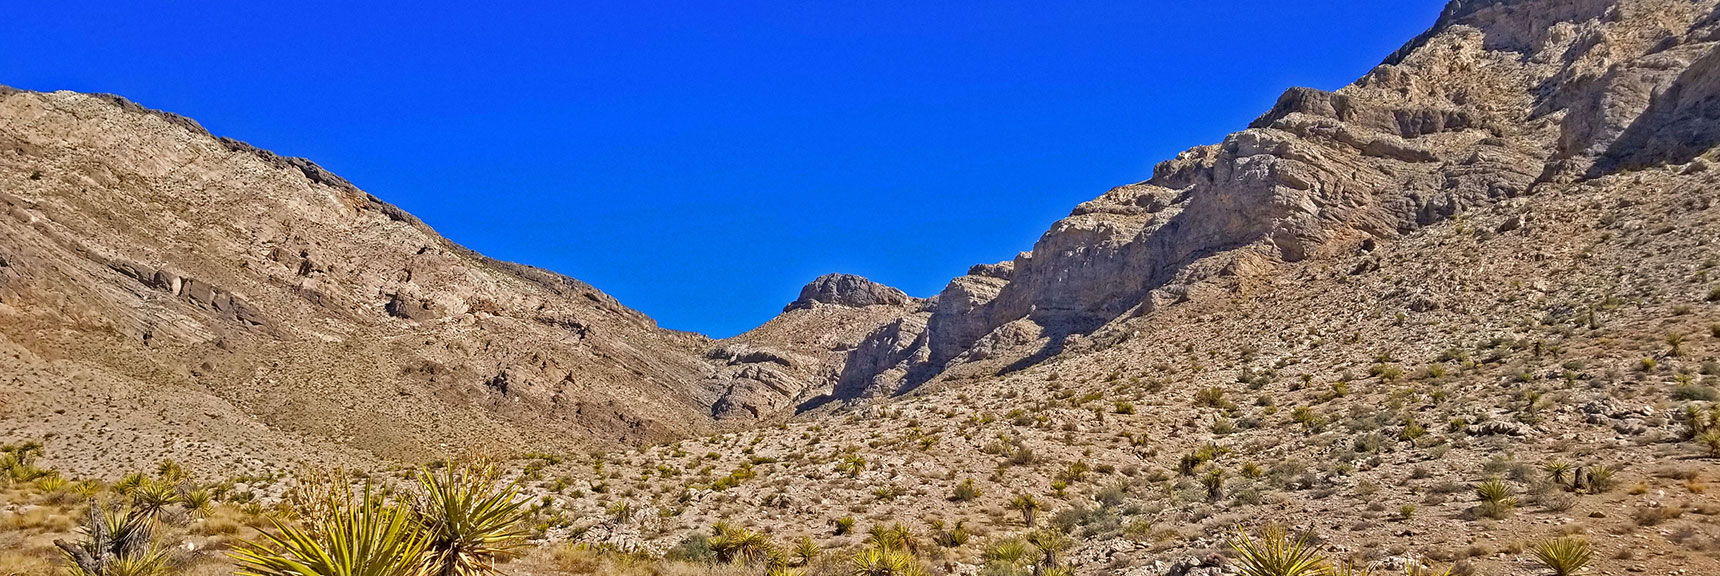 Saddle Approach to West of Cliffs, Looks Hopeful. Will Explore Later. | Little La Madre Mt, Little El Padre Mt, Little Burnt Peak | Near La Madre Mountains Wilderness, Nevada